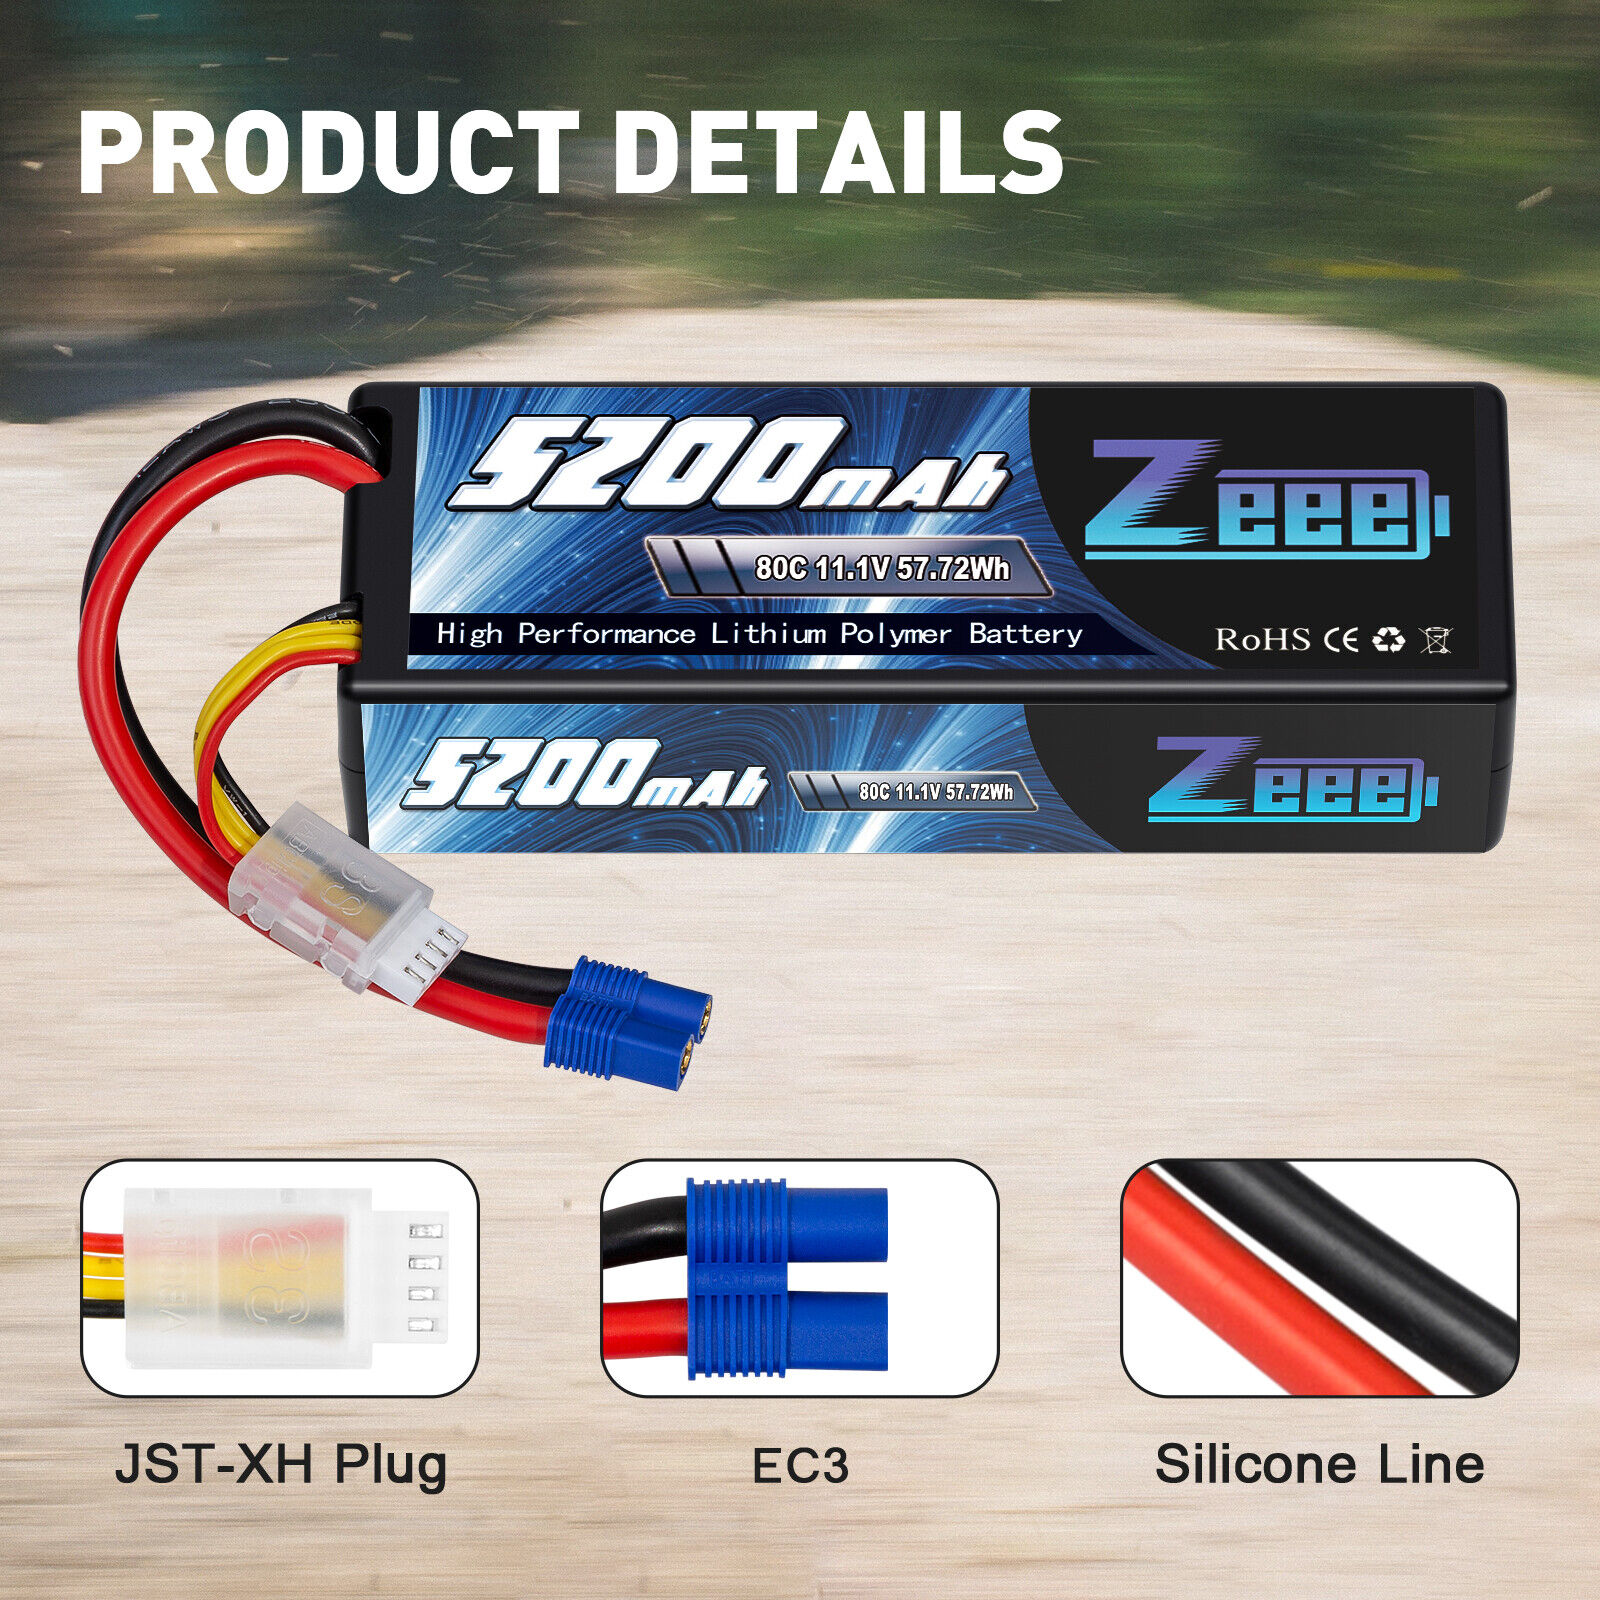 2x Zeee 11.1V 80C 5200mAh EC3 3S LiPo Battery for RC Car Truck Helicopter Buggy ZEEE Does Not Apply - фотография #2